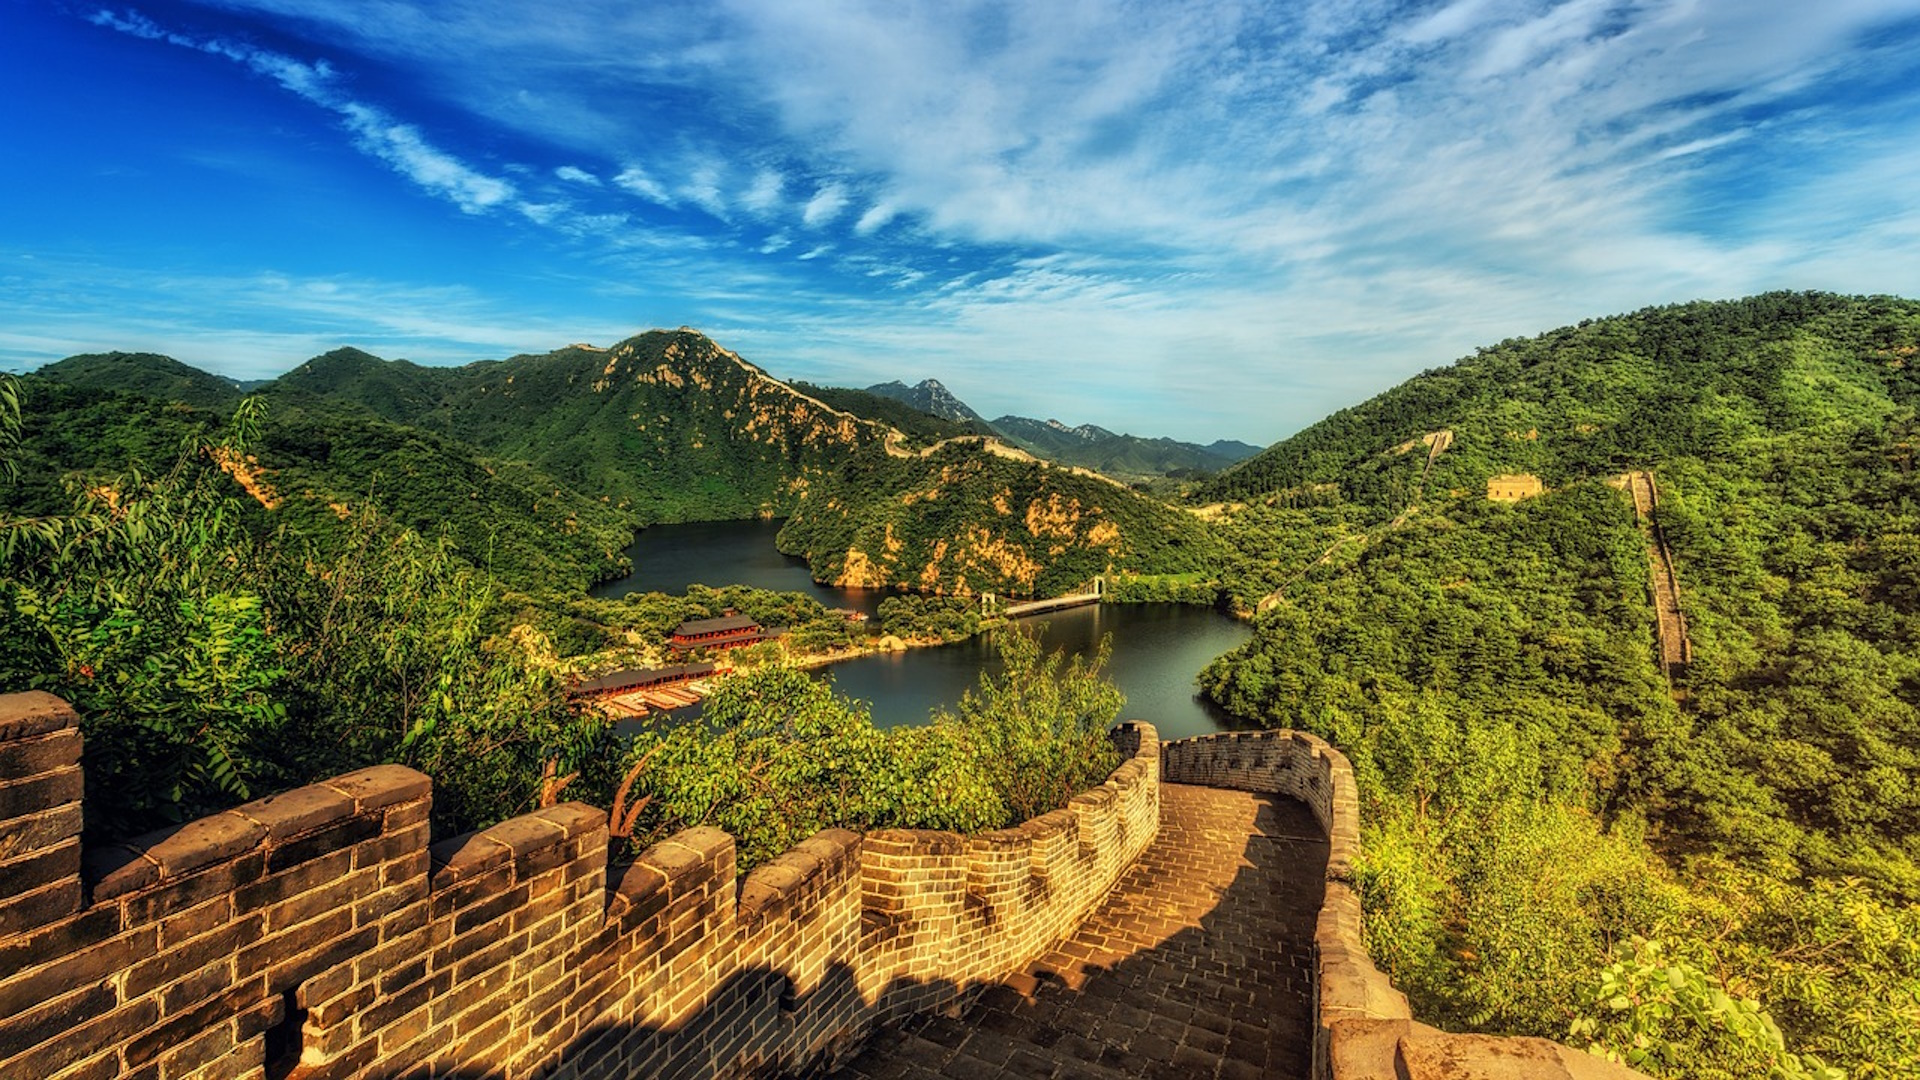 The Great Wall of China beautiful places